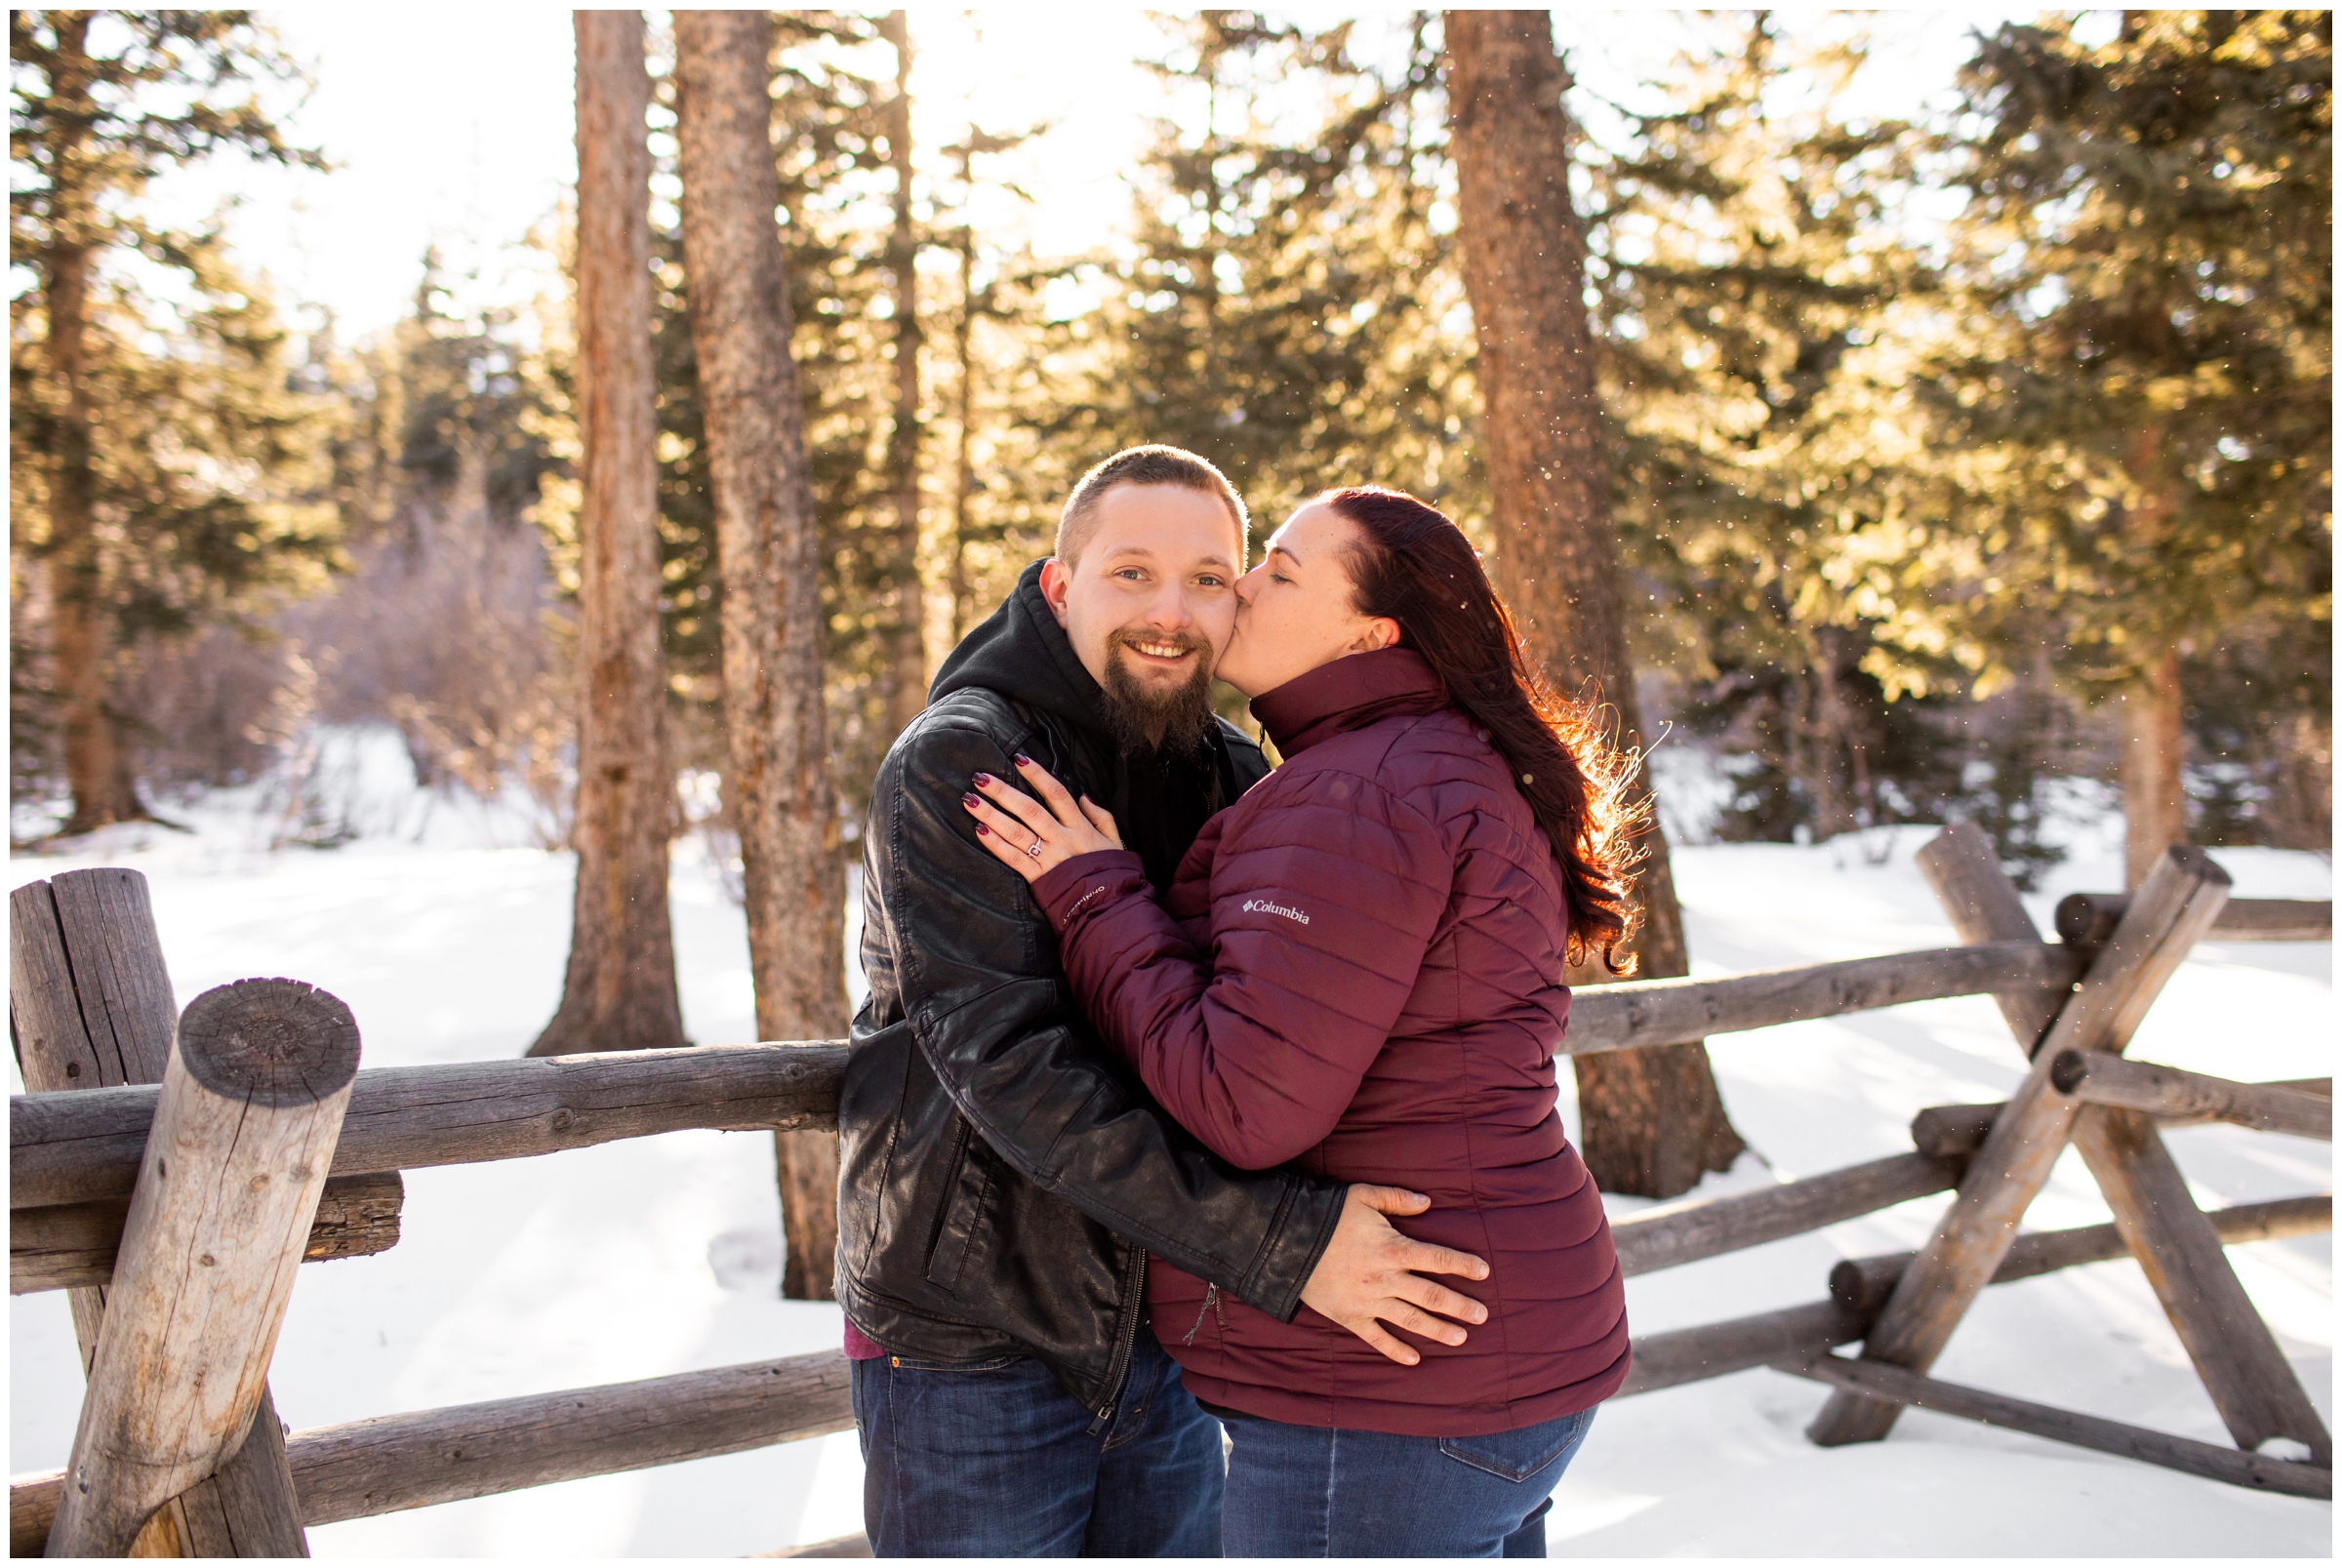 Colorado winter engagement portraits at Echo Lake Park by mountain wedding photographer Plum Pretty Photography